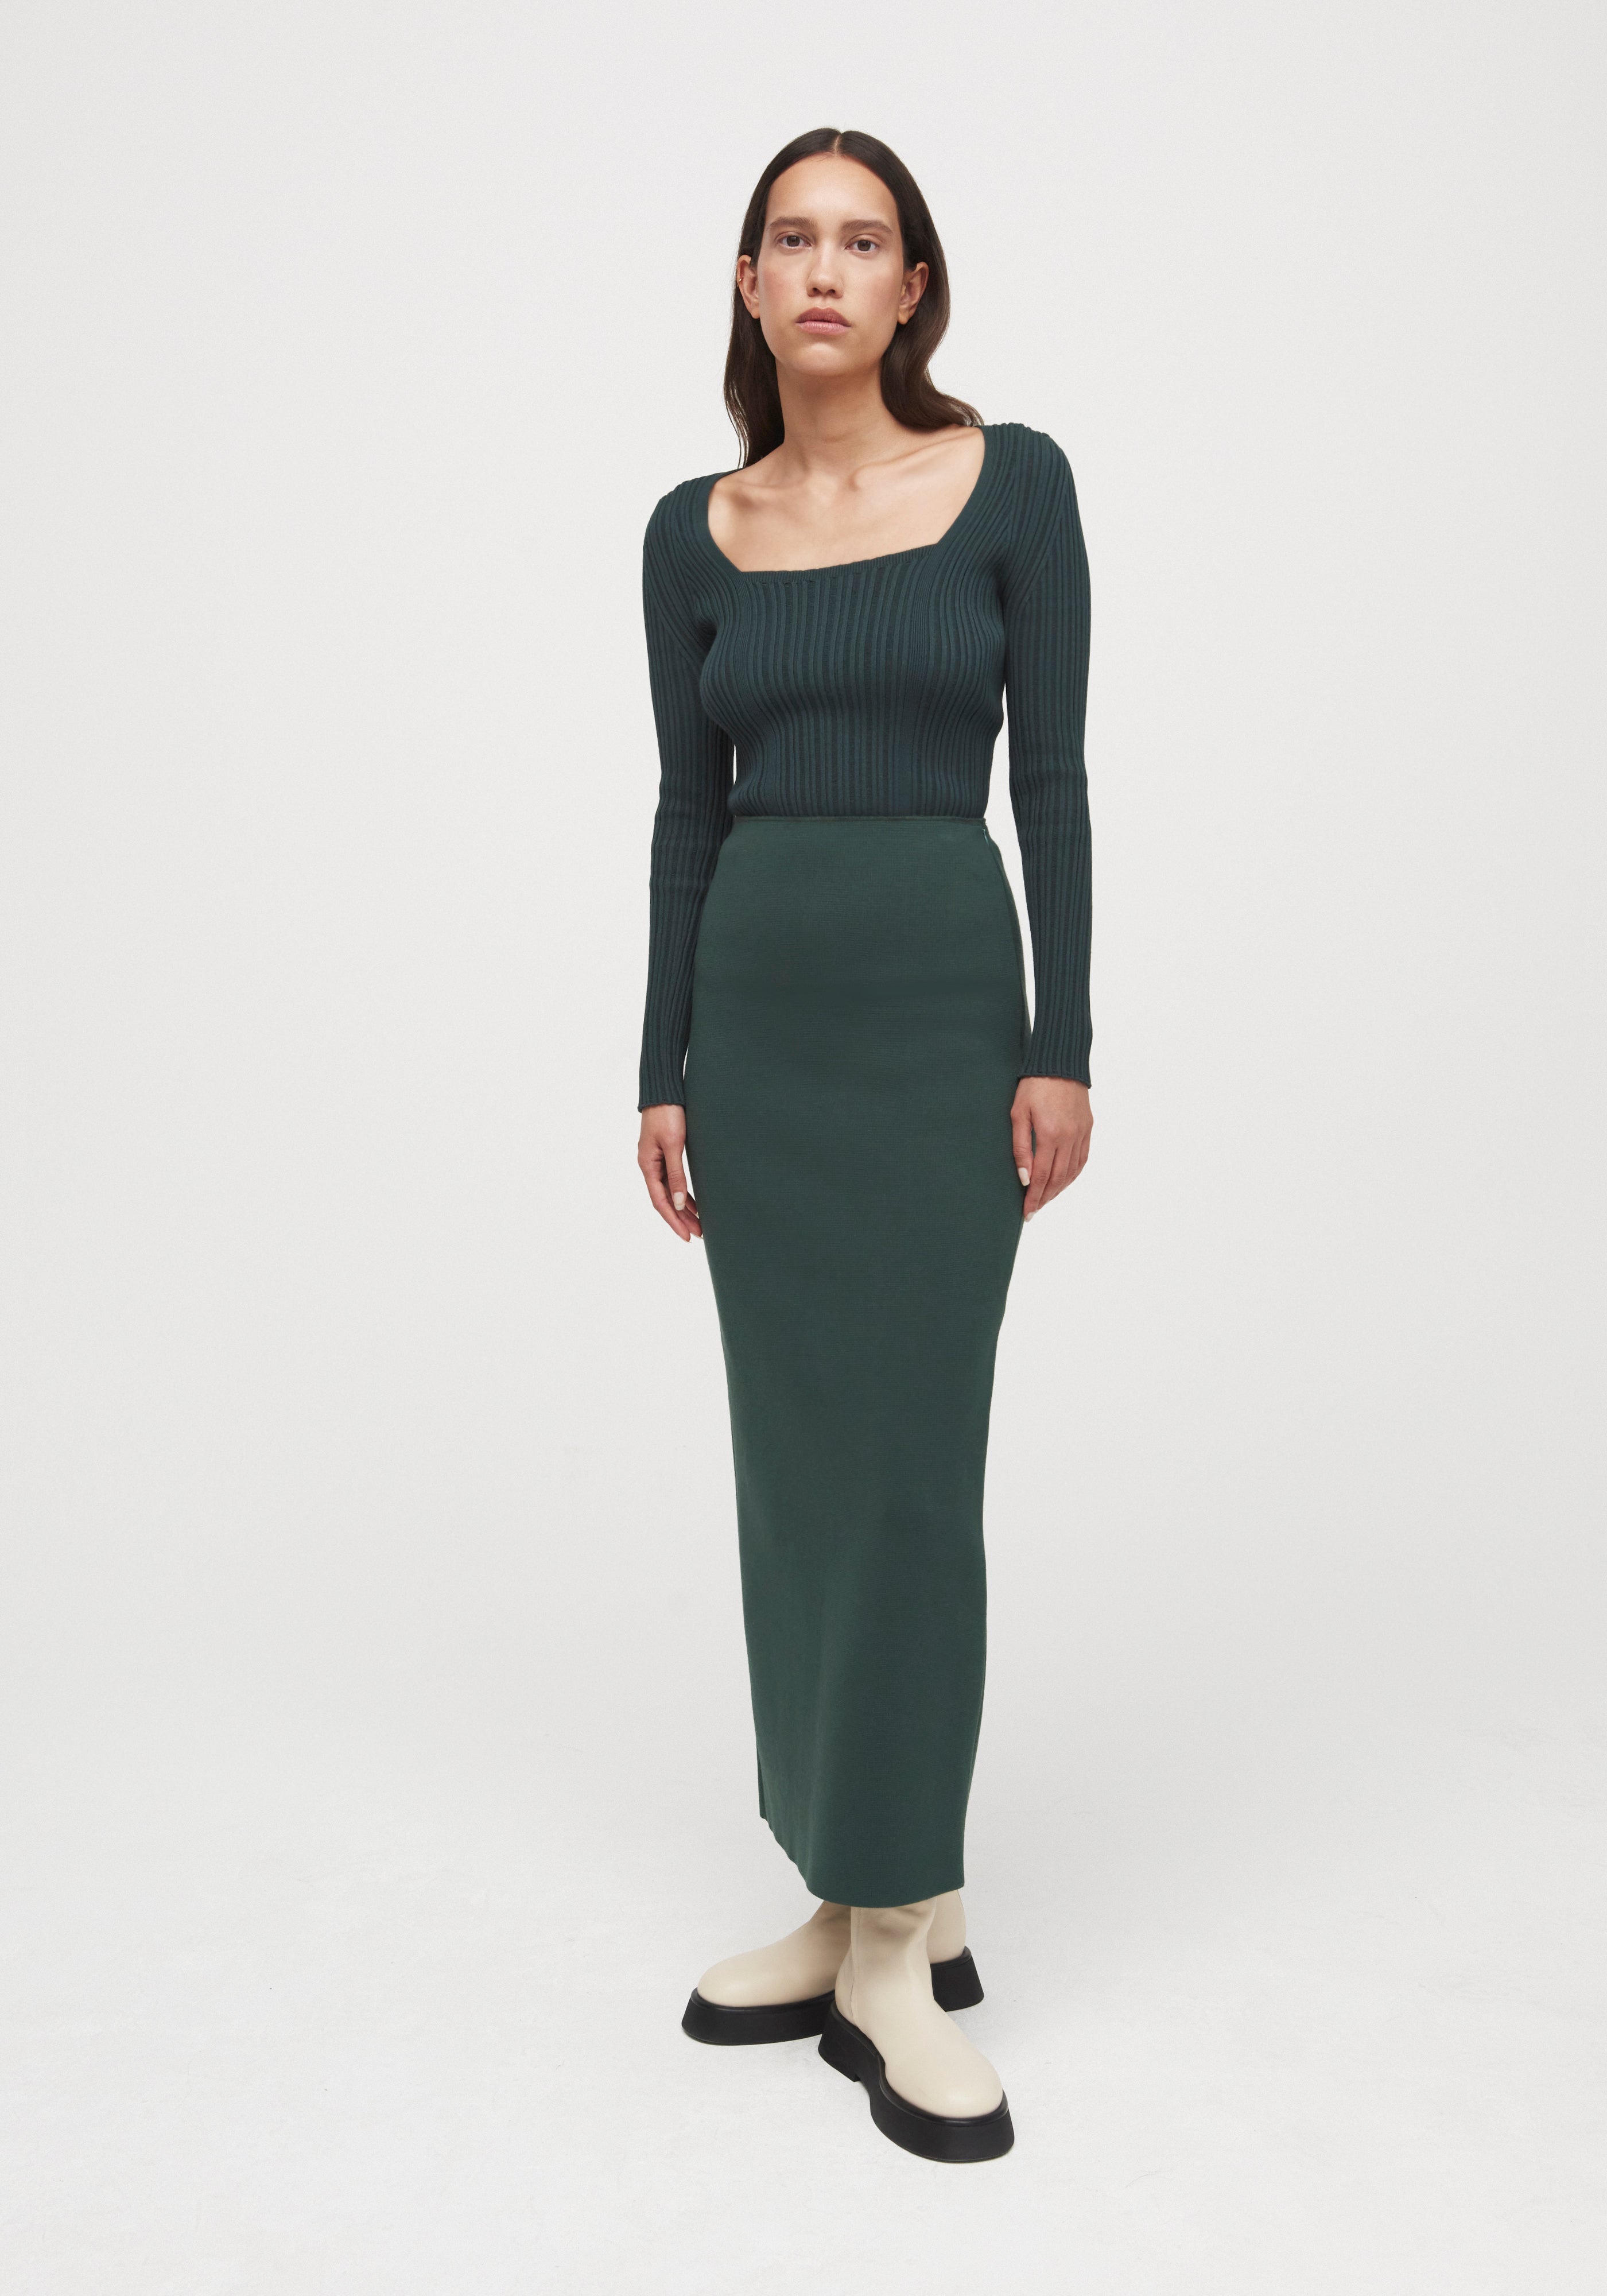 AERON FINESSE ECO STRETCH Square neck long sleeve top – emerald